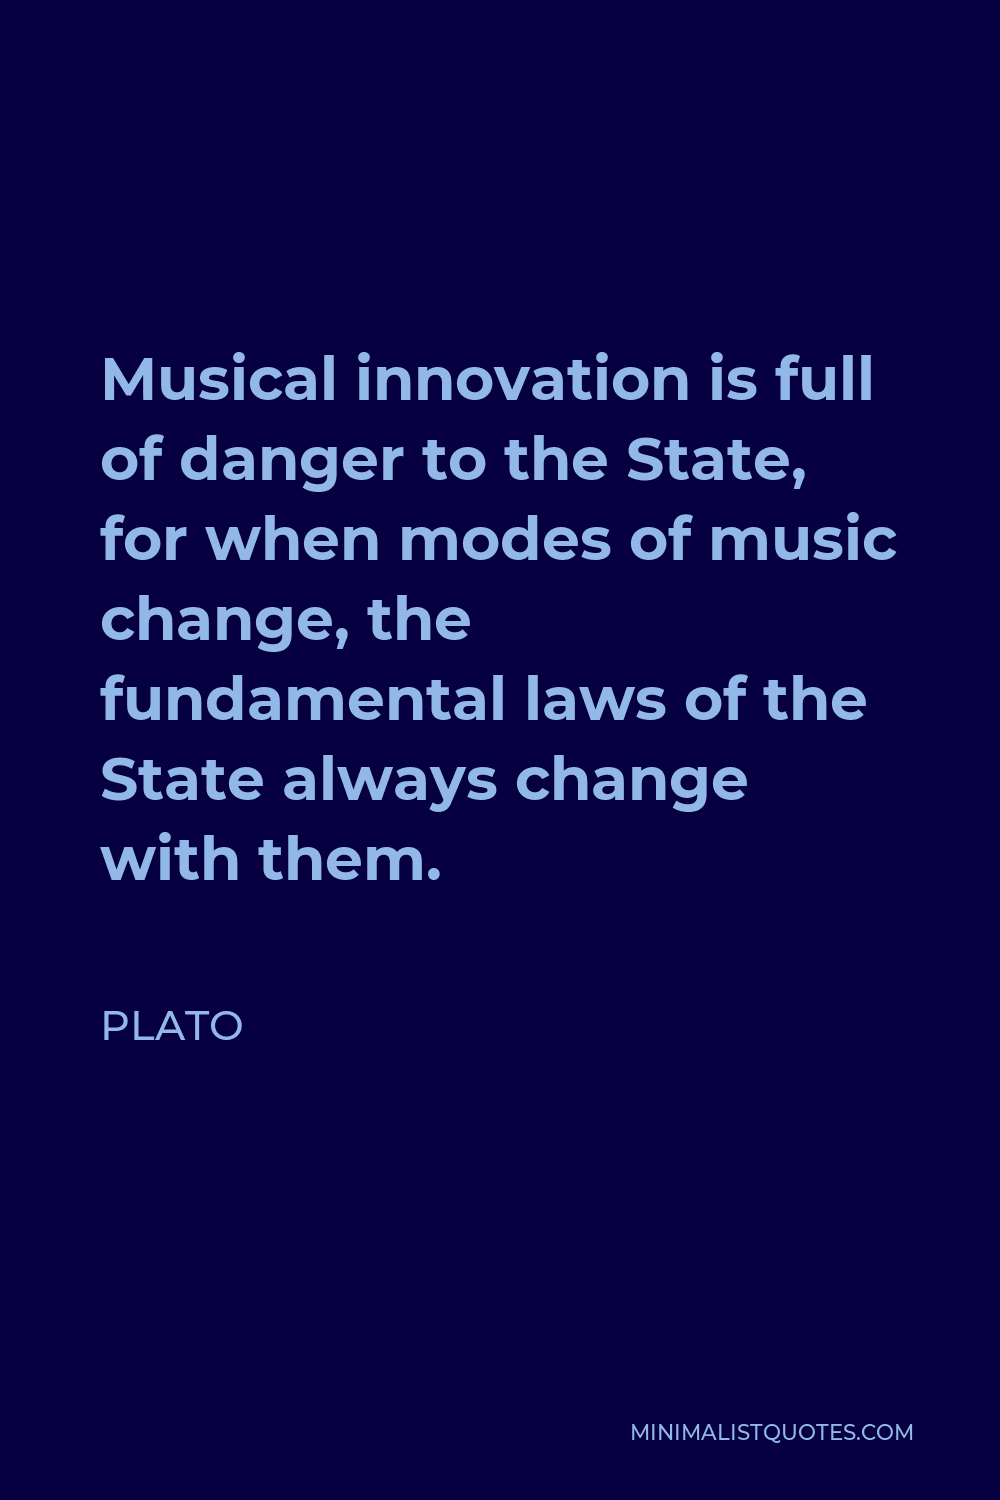 Plato Quote - Musical innovation is full of danger to the State, for when modes of music change, the fundamental laws of the State always change with them.